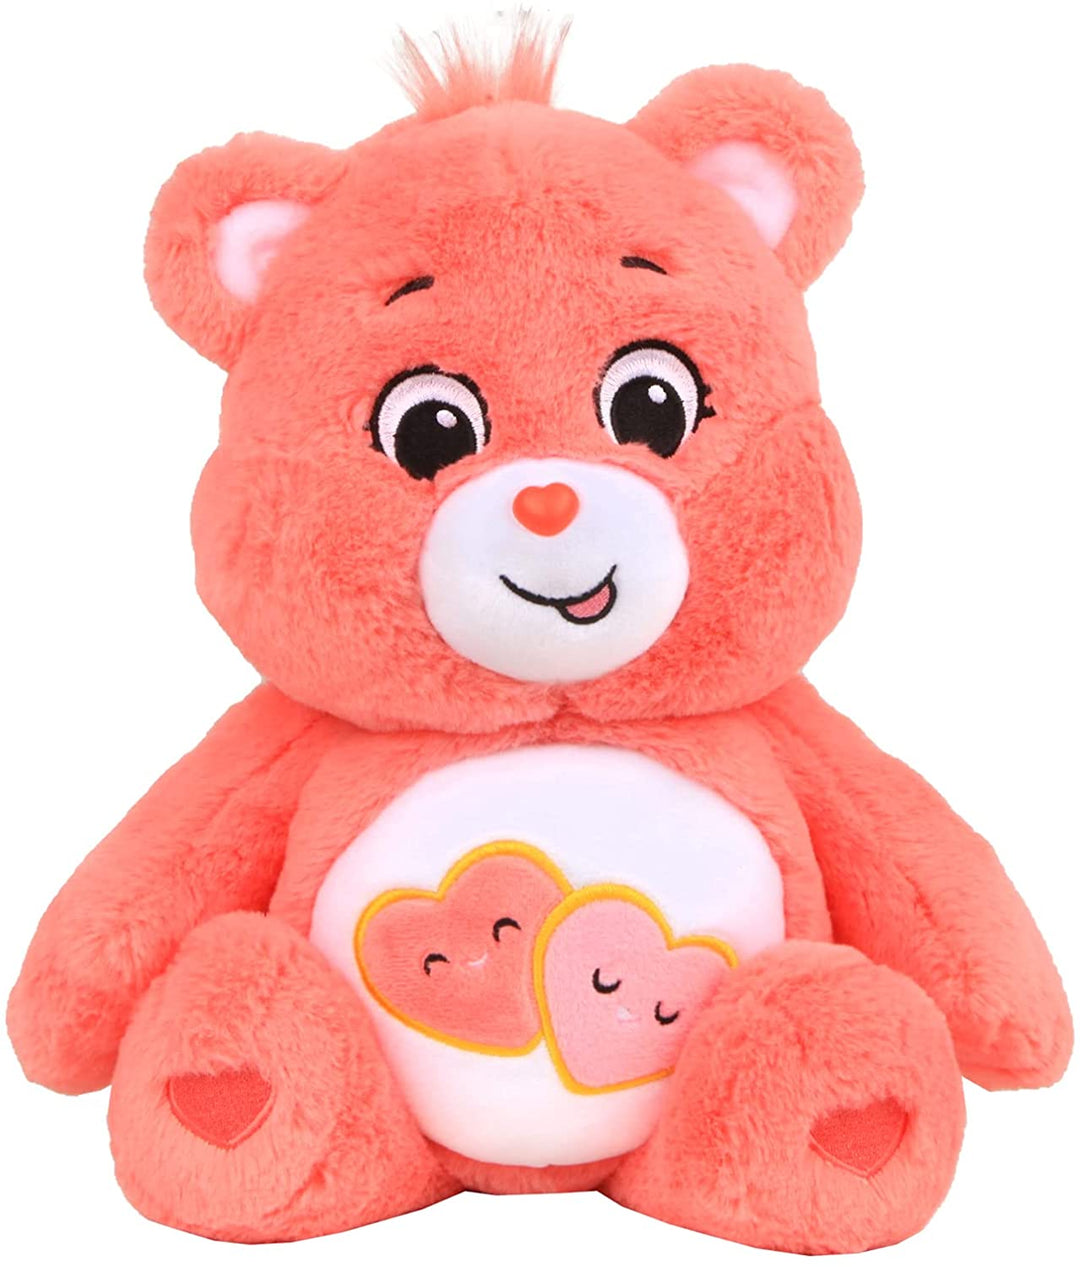 Care Bears 22084 14 Inch Medium Plush Love-A-Lot Bear, Collectable Cute Plush Toy, Cuddly Toys for Children, Soft Toys for Girls and Boys, Cute Teddies Suitable for Girls and Boys Aged 4 Years +